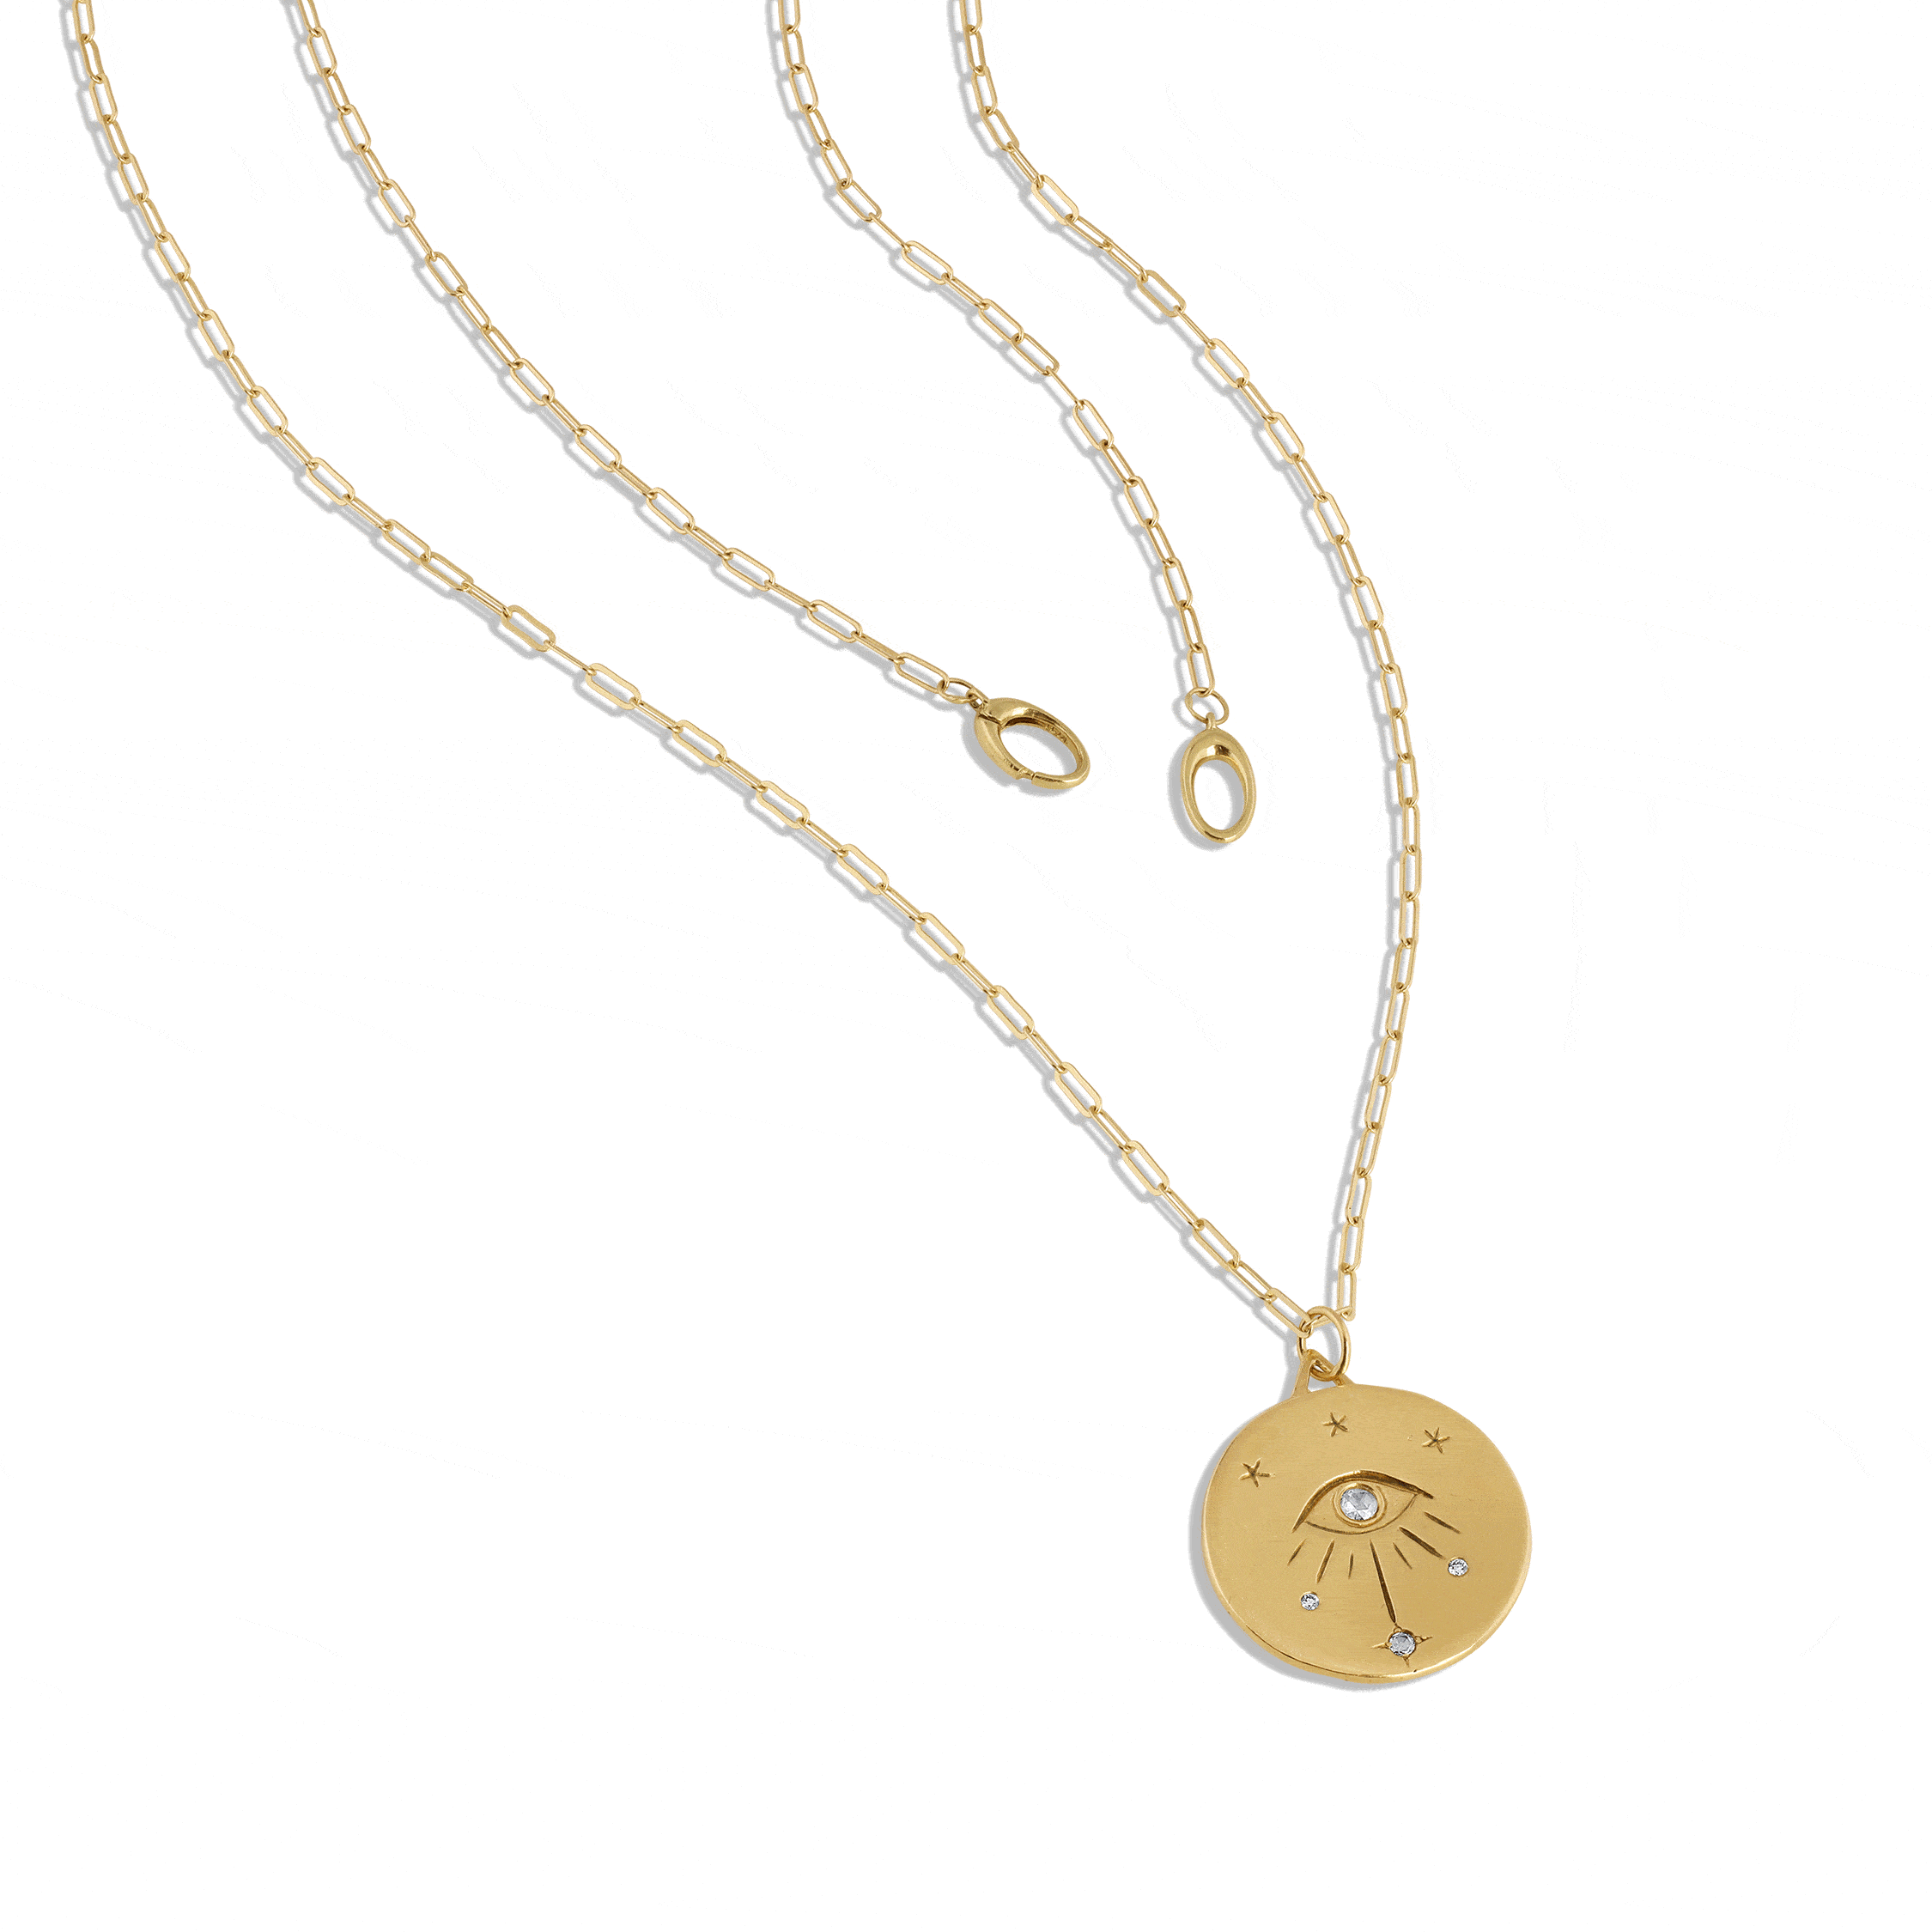 Fine Talisman Collection pendants and charms Pendulum Talsiman necklace | sapphires